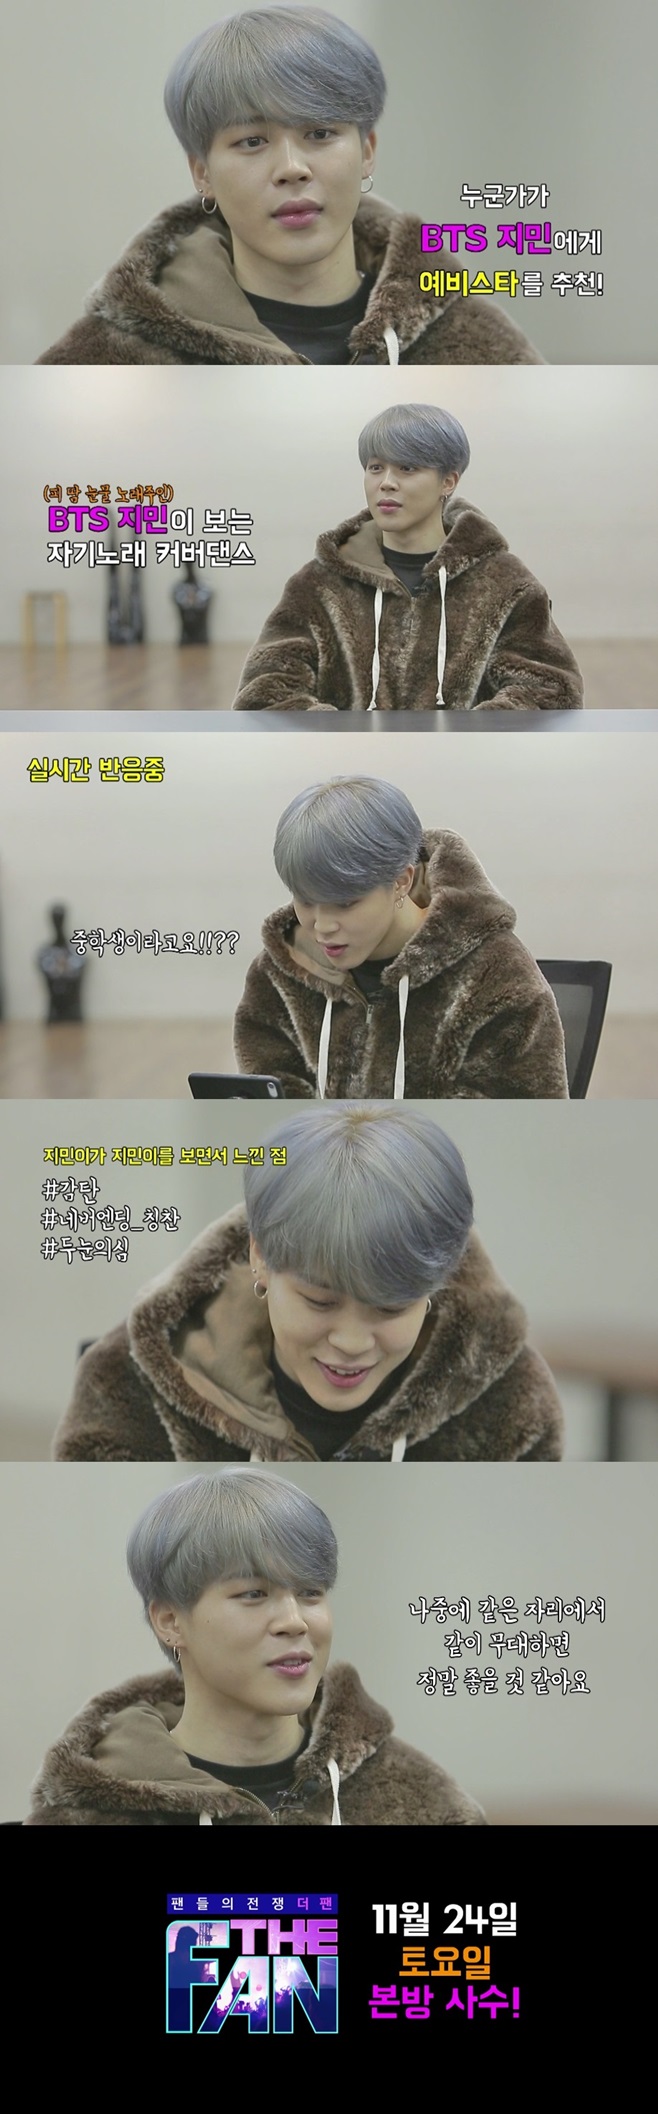 BTS (BTS) member Jimin has revealed his expectations for The Fan (THE FAN).SBS new entertainment program The Fan production team released BTS member Jimins special teaser video on the official SNS and portal site on the 19th.The Fan is a fandom survival of preliminary stars that the star first recognized. It is a music entertainment where the people evaluate the star of the rookies and decide the winner.Prior to the first broadcast, Tiger JK, Yoon Mi-rae, Ax, Han Chae-young, Superbi, 2PM Junho, Park So-hyun, Seo Hyo-rim, and other top stars in the entertainment industry recommended the prospective stars directly.Here, BTS member Jimin also confirmed a preliminary star of The Fan with his own eyes.Jimin, who recently met the production team of The Fan, was surprised to see the cover dance video of blood, sweat, tears of a preliminary star recommended by Idol discriminant Park So-hyun.Before watching video, Jimin was ashamed that I am not a person who can evaluate others or talk about such a story, but when video started, I watched it.In particular, Jimin was surprised that the preliminary star in video was a middle school student and was more interested in taking on his name.Then, he applauded the talent of the preliminary star who showed his part and poured out his admiration.He said, I do not favor Jimin, but Jimin seems to be Jimin.After the filming, Jimin asked the crew if it seems to be a really good friend and said, Its not a lie, its a really good friend.I did not do this, he added, revealing the expectation of the preliminary star. The first broadcast at 6:25 pm on the 24th.